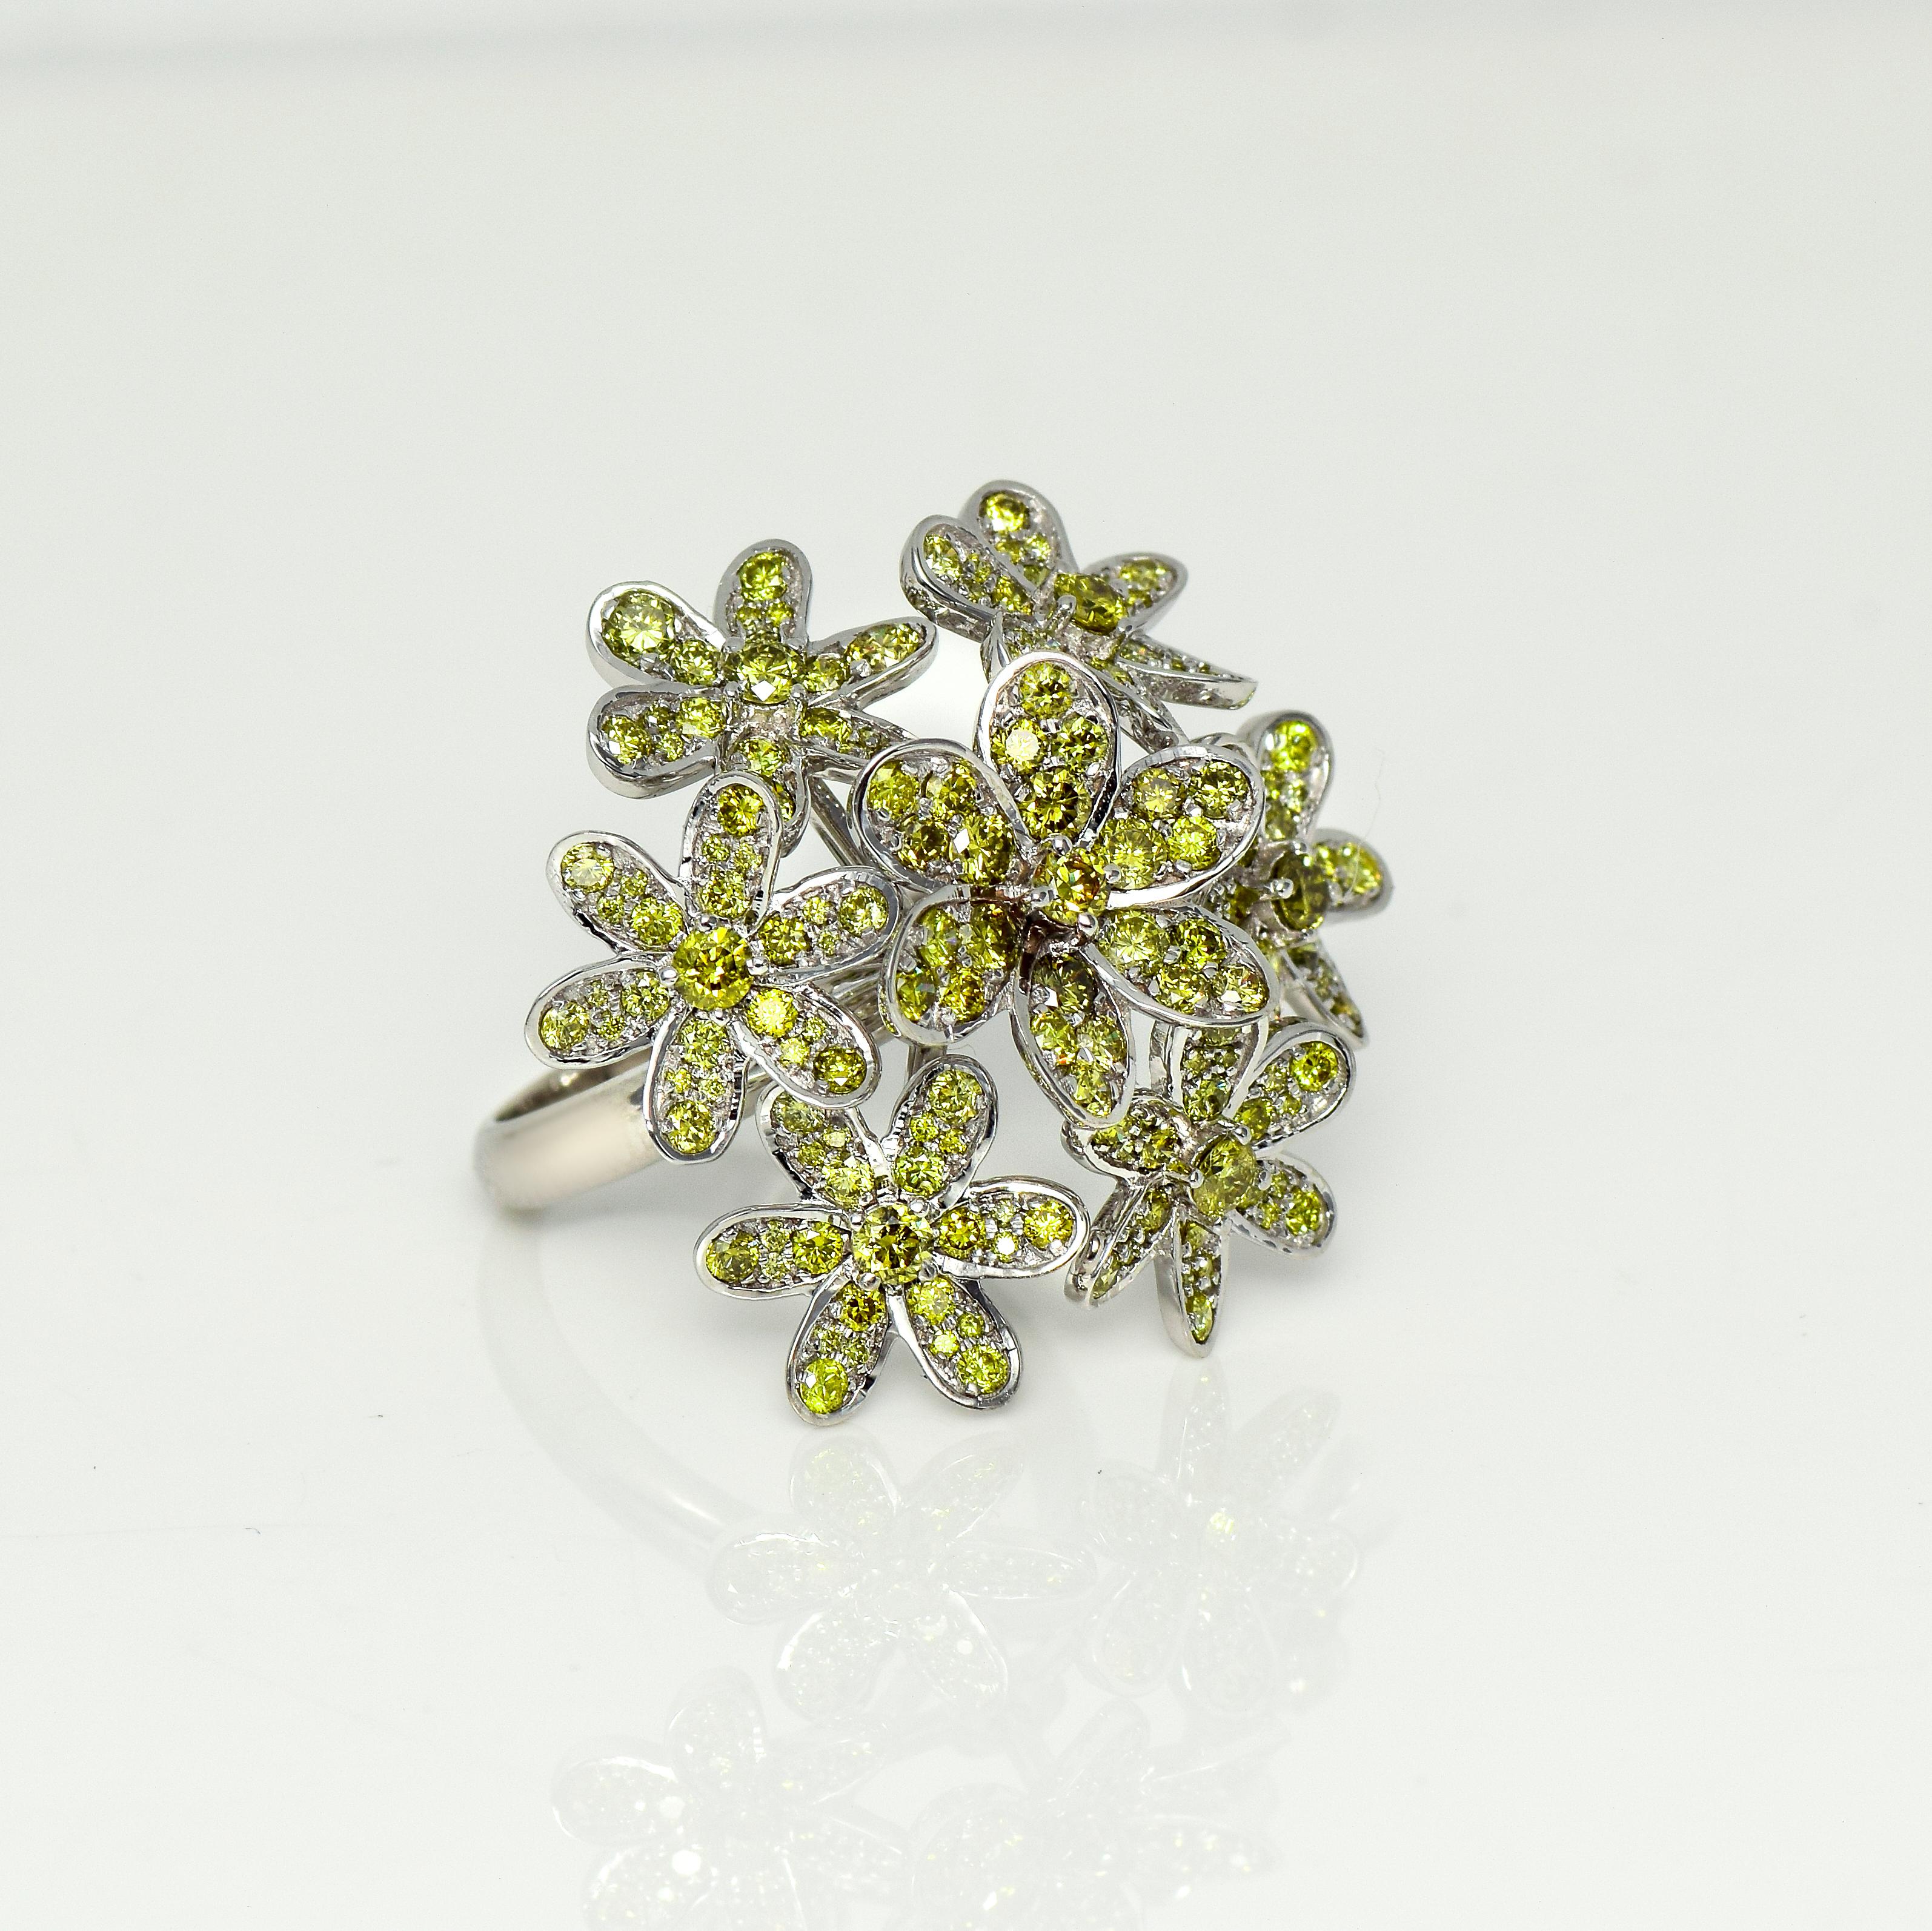 IGI 18K 2.06 Ct Natural Greenish Yellow Diamonds Flowers Cocktail Ring In New Condition For Sale In Kaohsiung City, TW